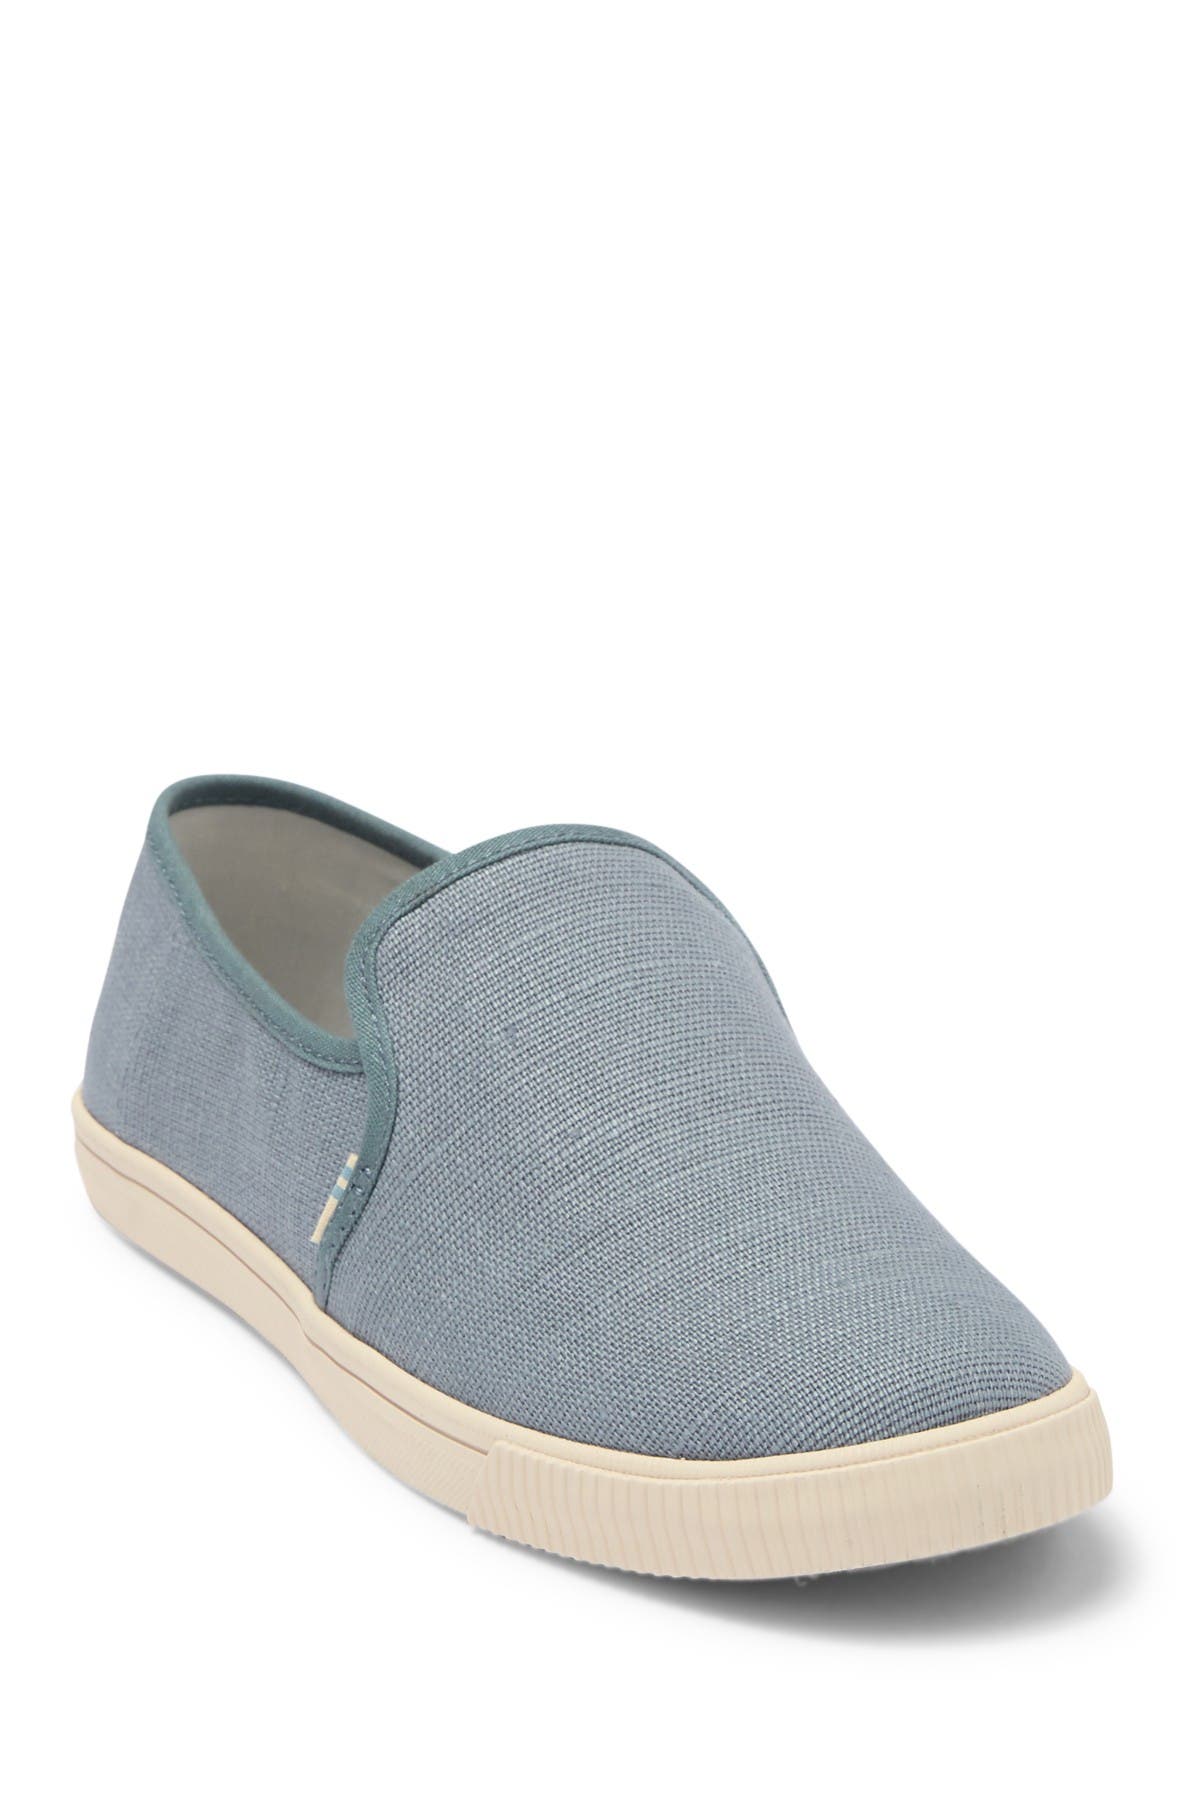 toms clemente slip ons